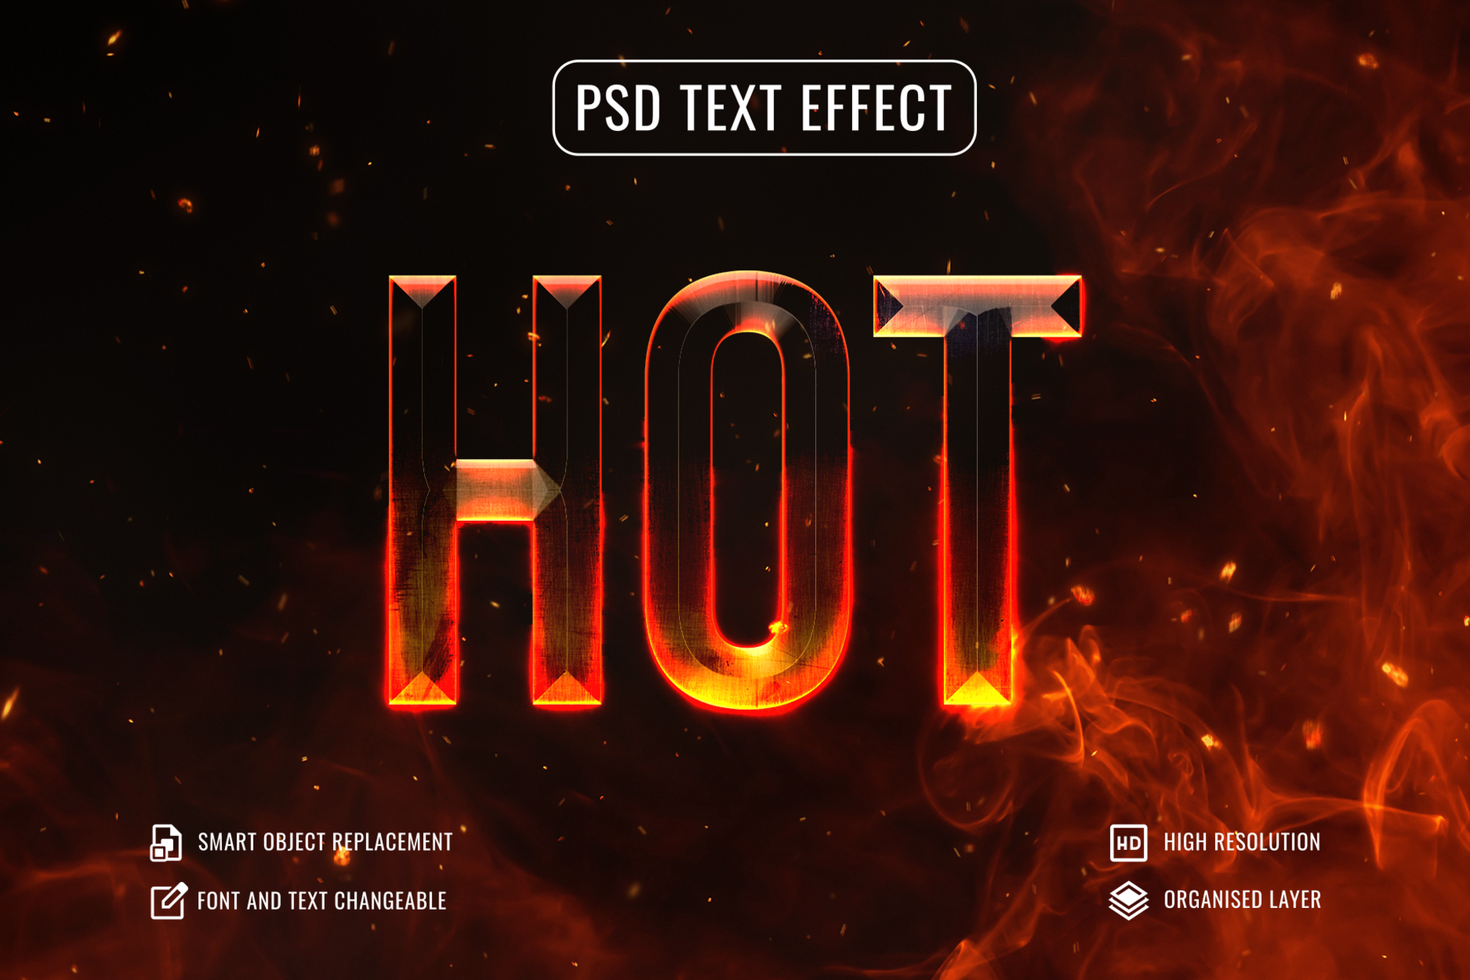 hot metal iron text effect with flames in background psd